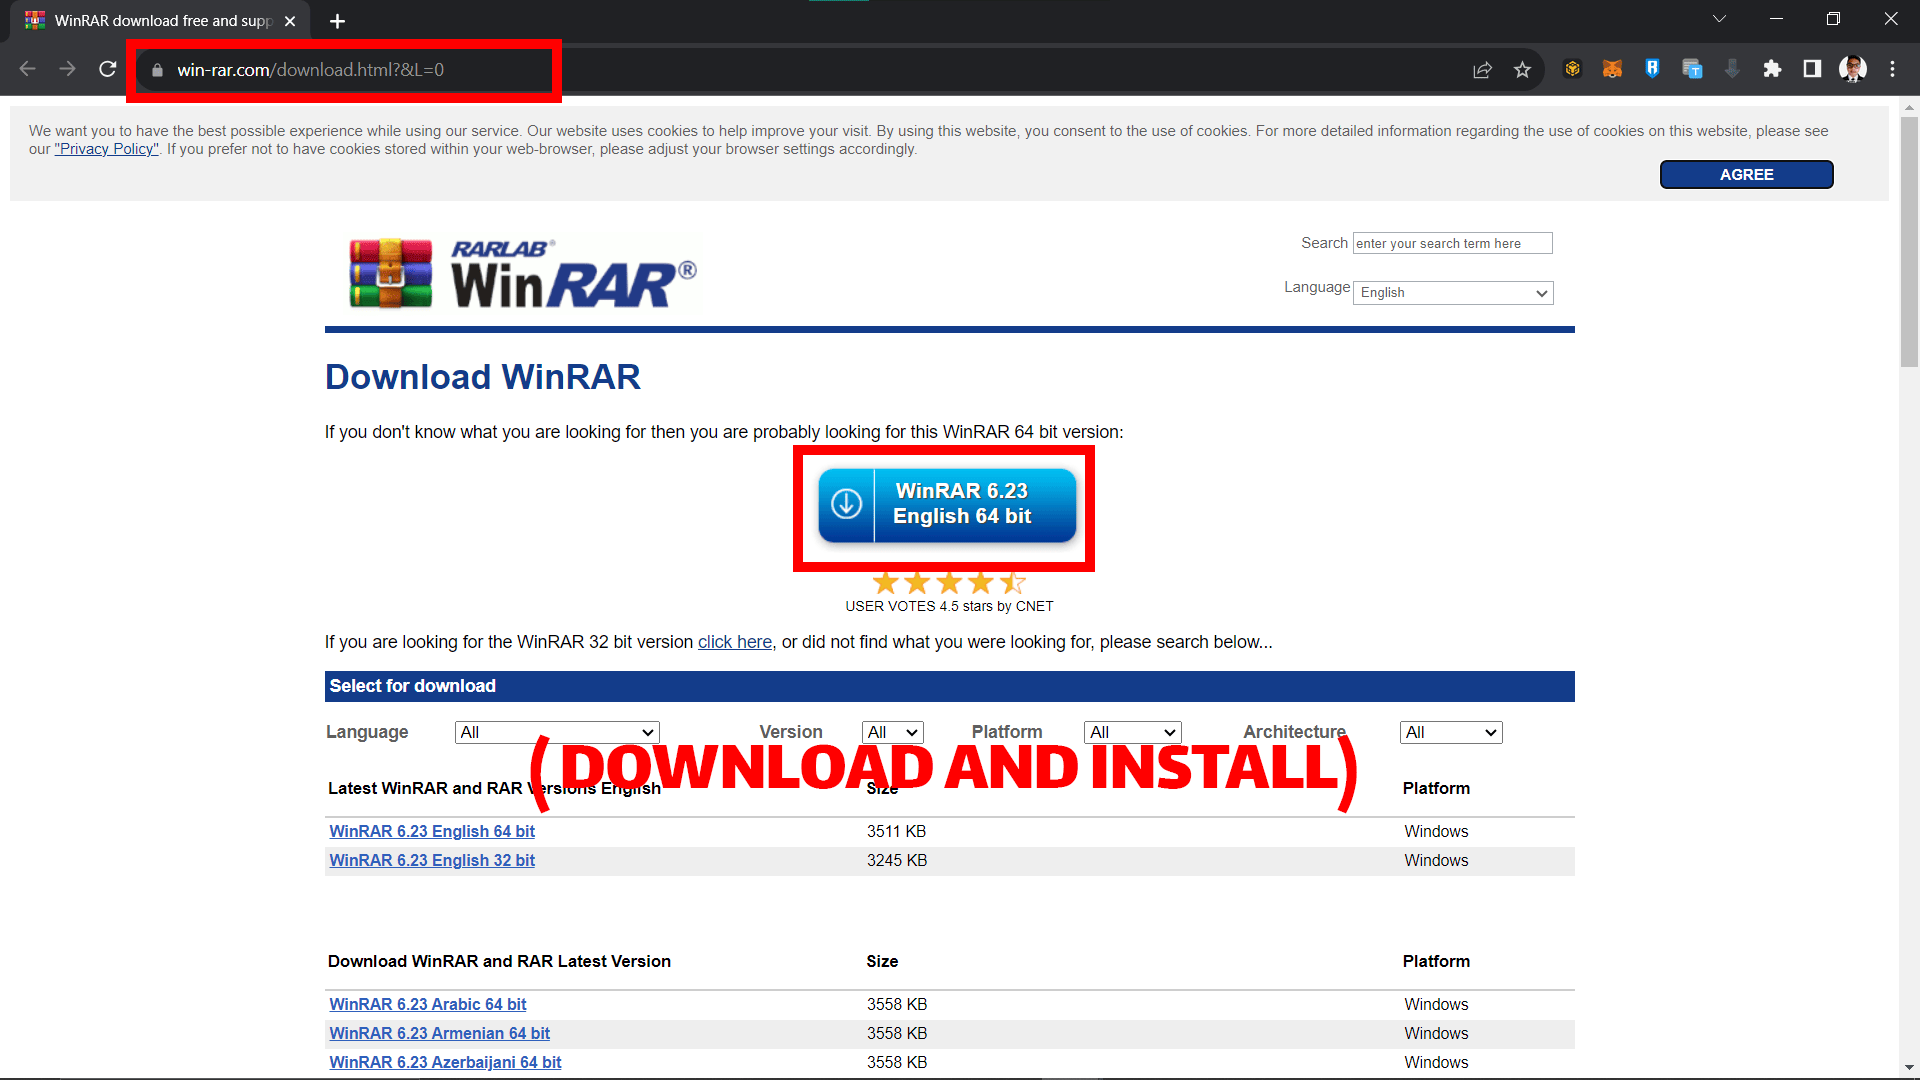 How To Open GZ Files on Windows using WinRAR: Step 1